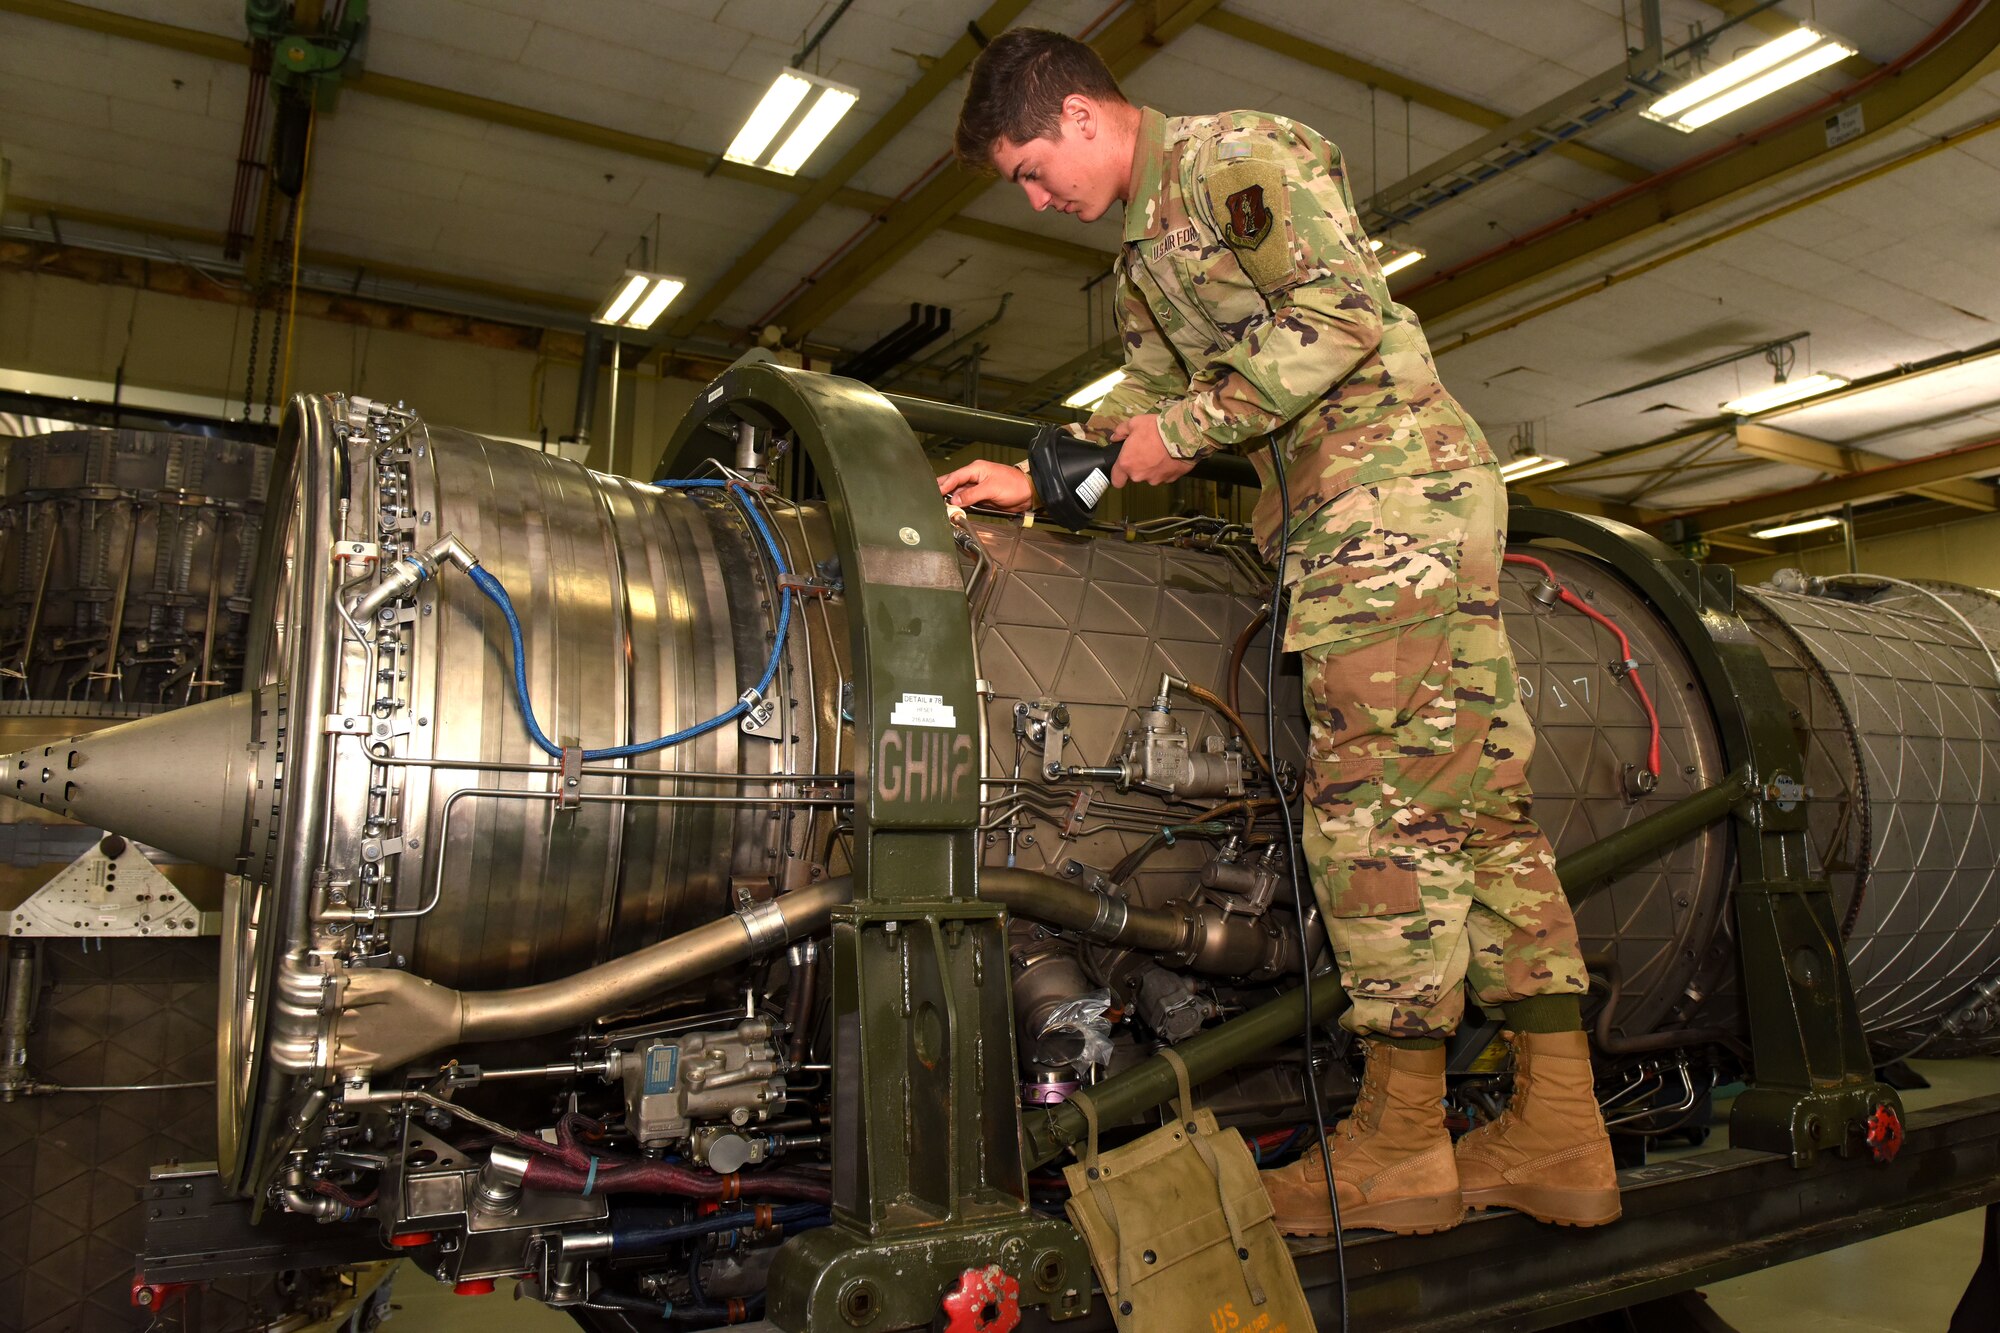 U.S. Air Force Airman 1st Class Steven Hershberger, a 169th Maintenance Squadron aerospace propulsion mechanic, conducts an inspection on an F-16 fighter jet engine at McEntire Joint National Guard Base, South Carolina, May 14, 2021. (U.S. Air National Guard photo by Senior Airman Mackenzie Bacalzo)